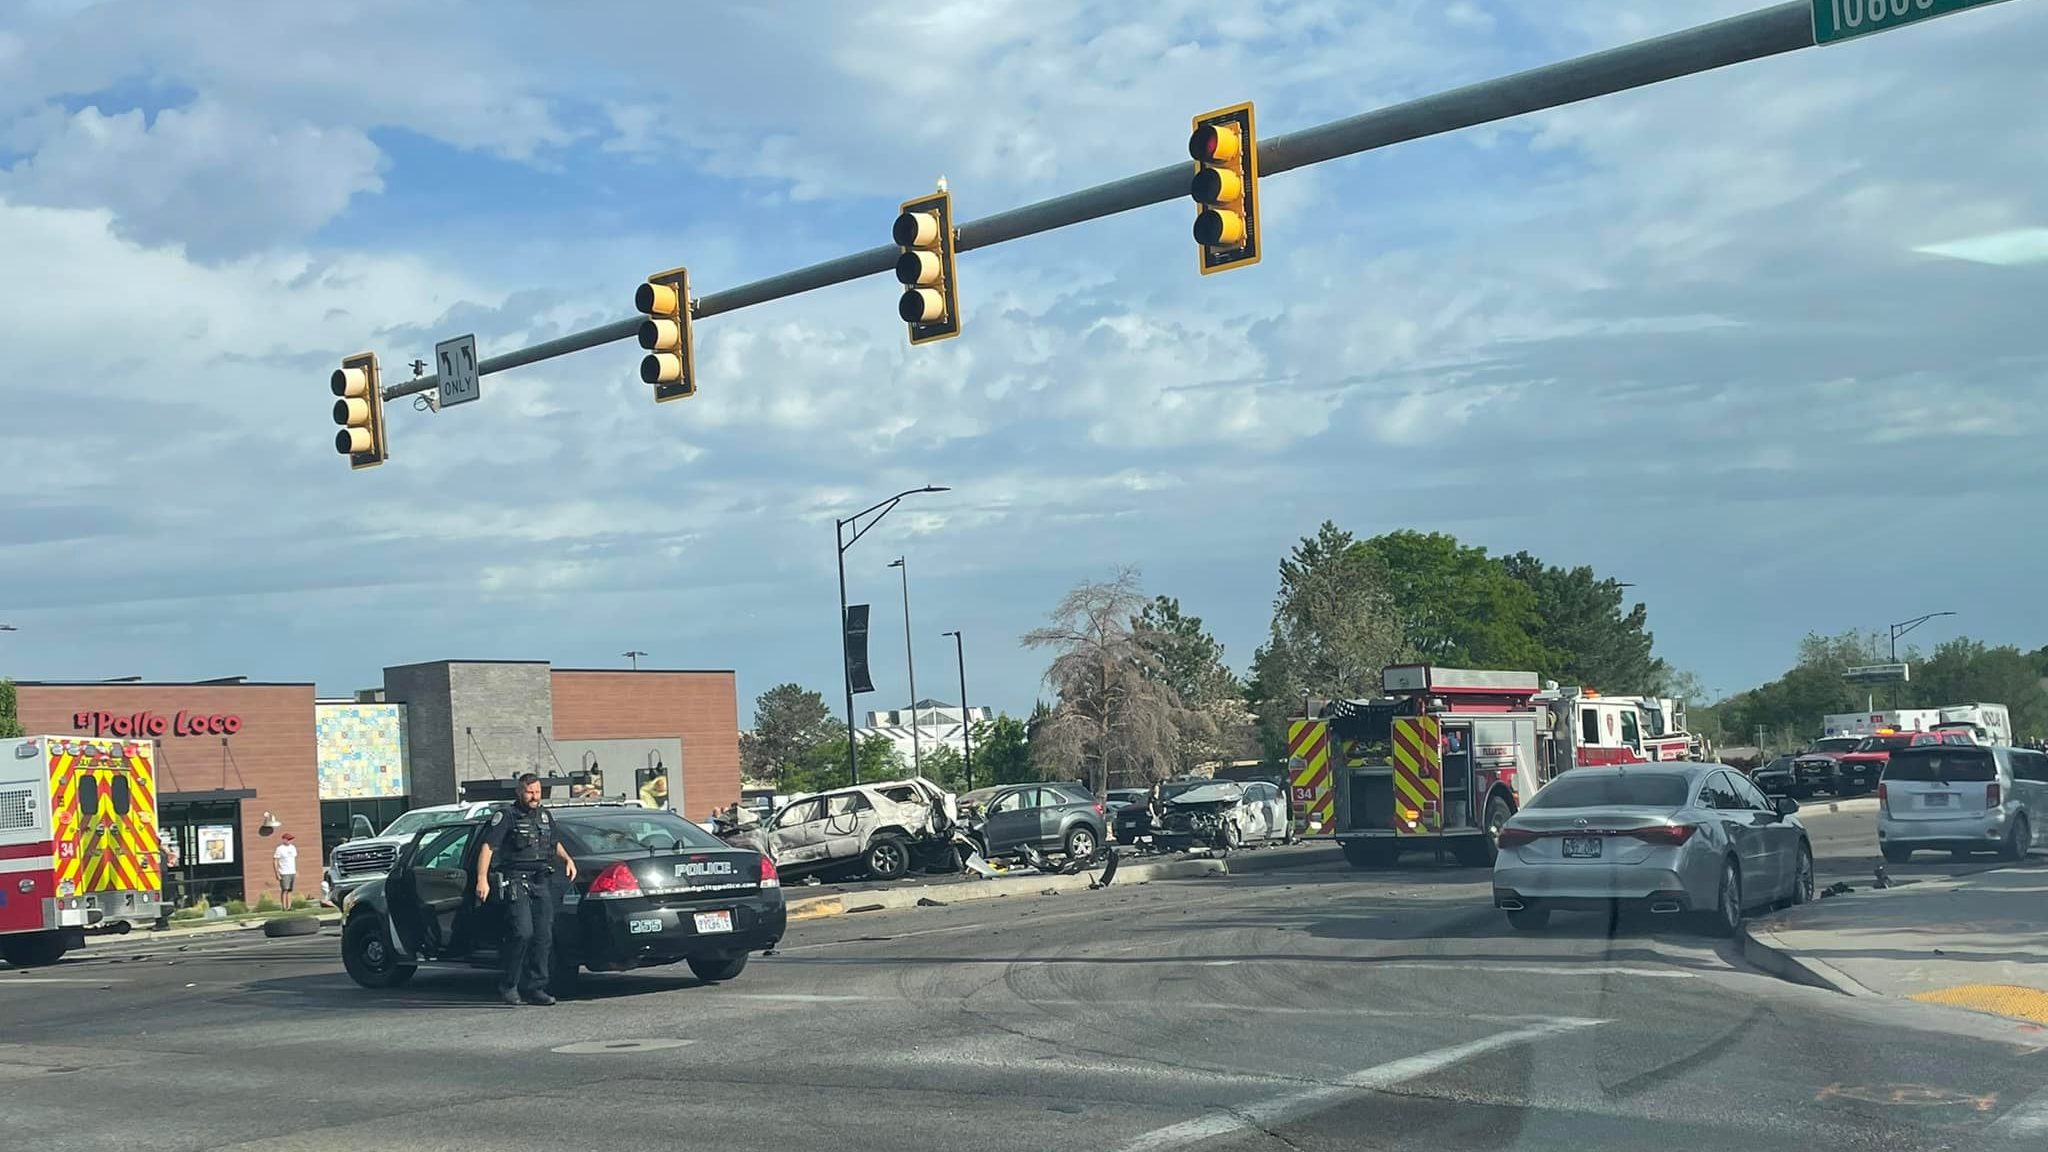 May 27, 2022: A multi-car crash closes State Street in Sandy. Photo credit: Sandy City Police...